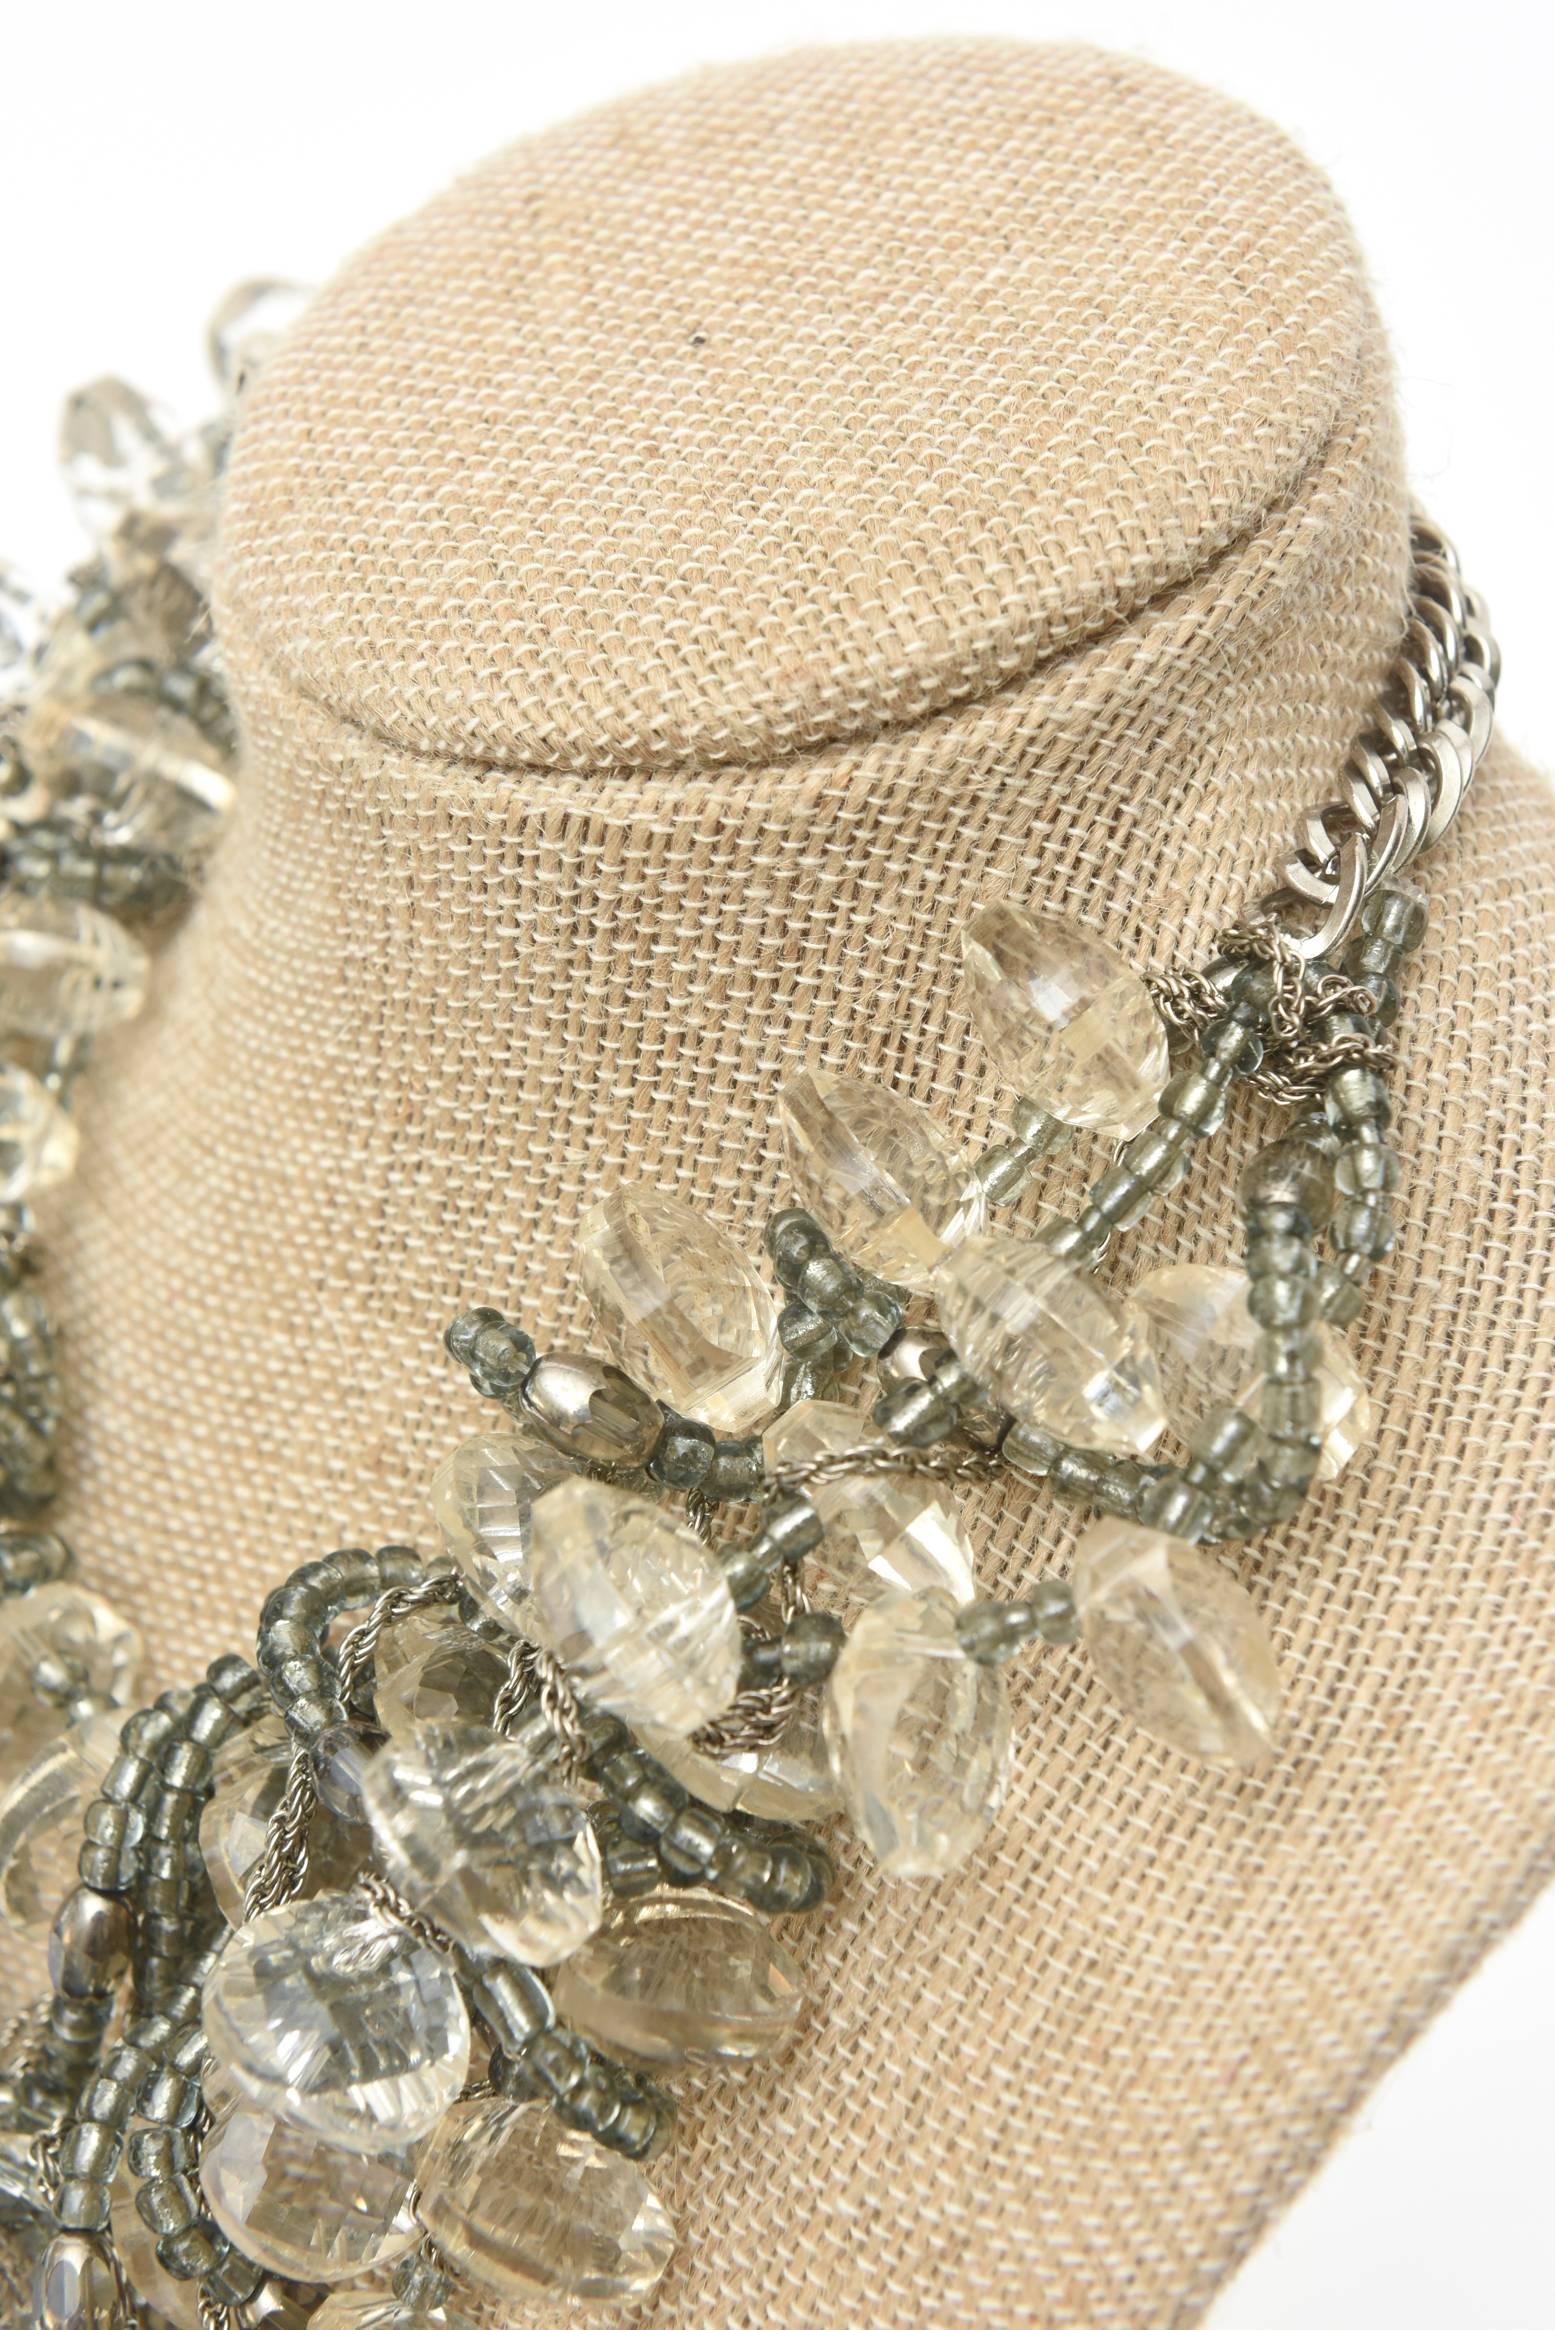  Faceted Lucite Chain, Beads And Silver Bib Multi Strand Necklace Vintage For Sale 2